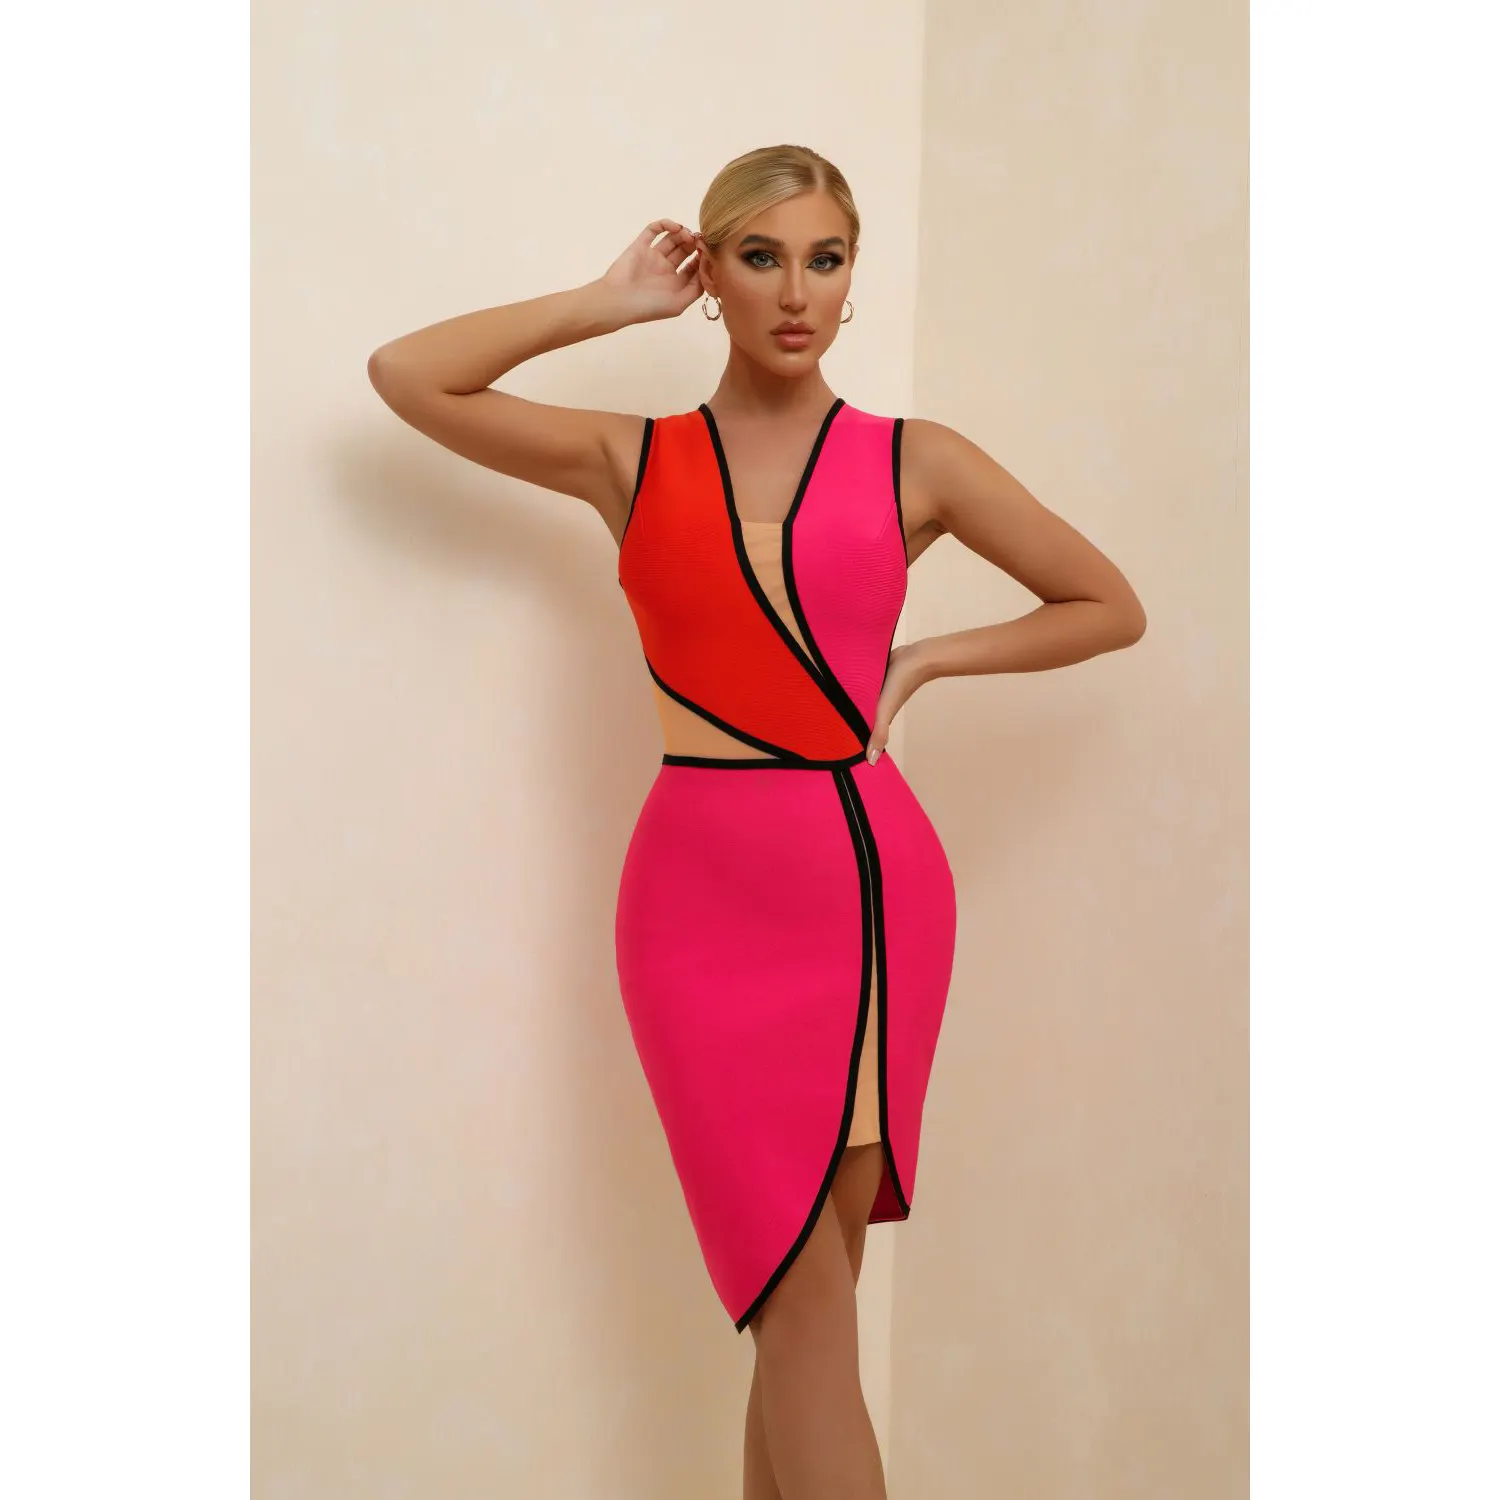 Newest Off Shoulder Sexy Women Strapless Bodycon Dress Sleeveless Fashion Casual Party Dresses